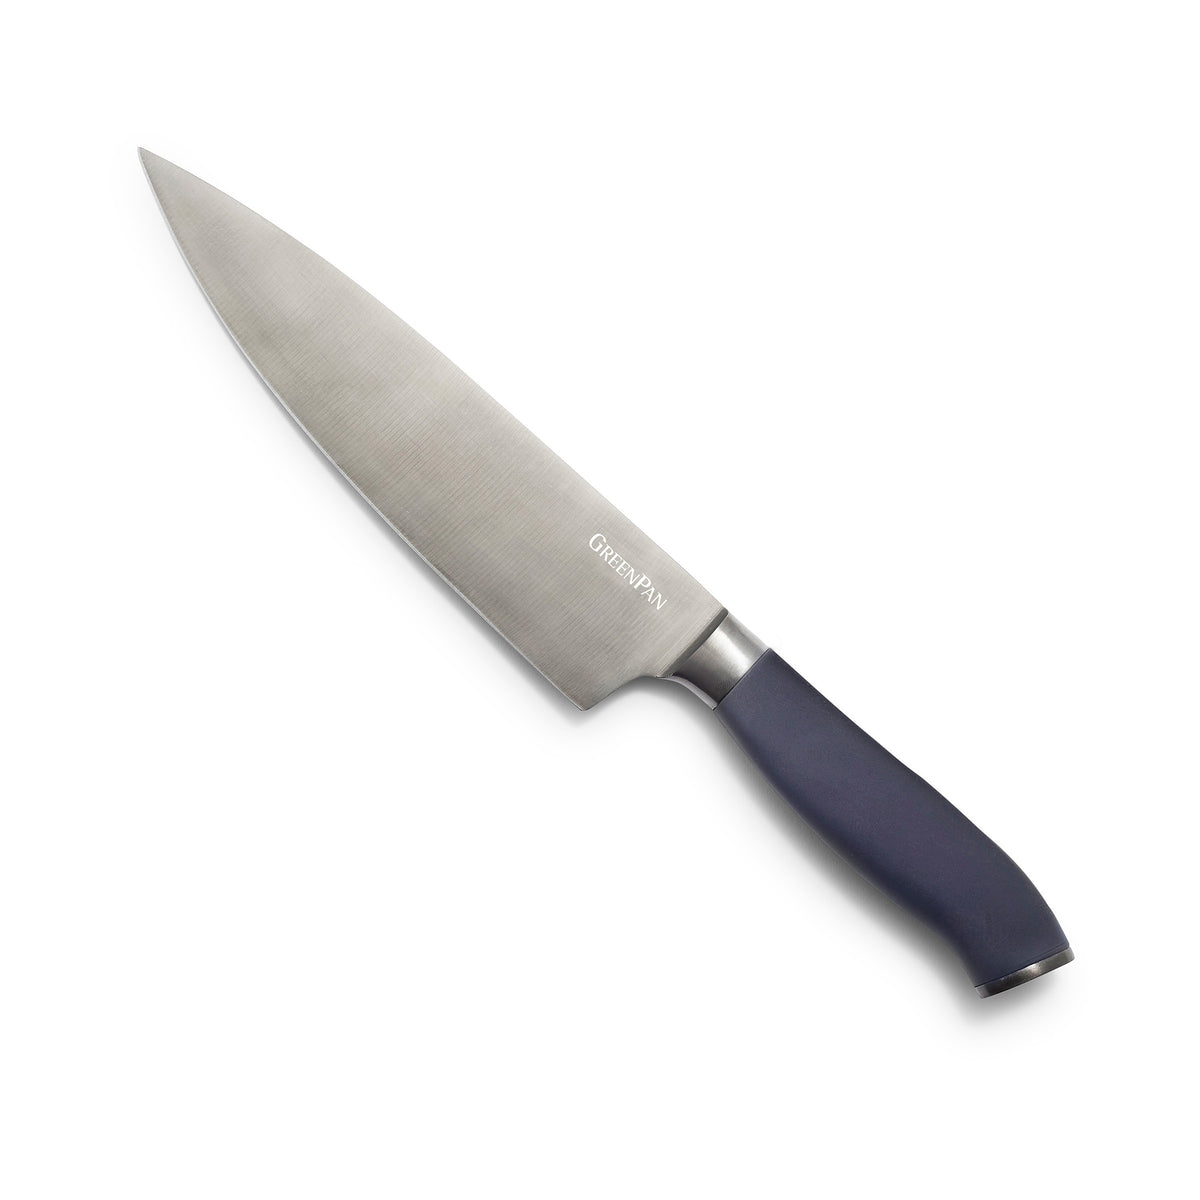 Choice 8 Vegetable Knife with White Handle